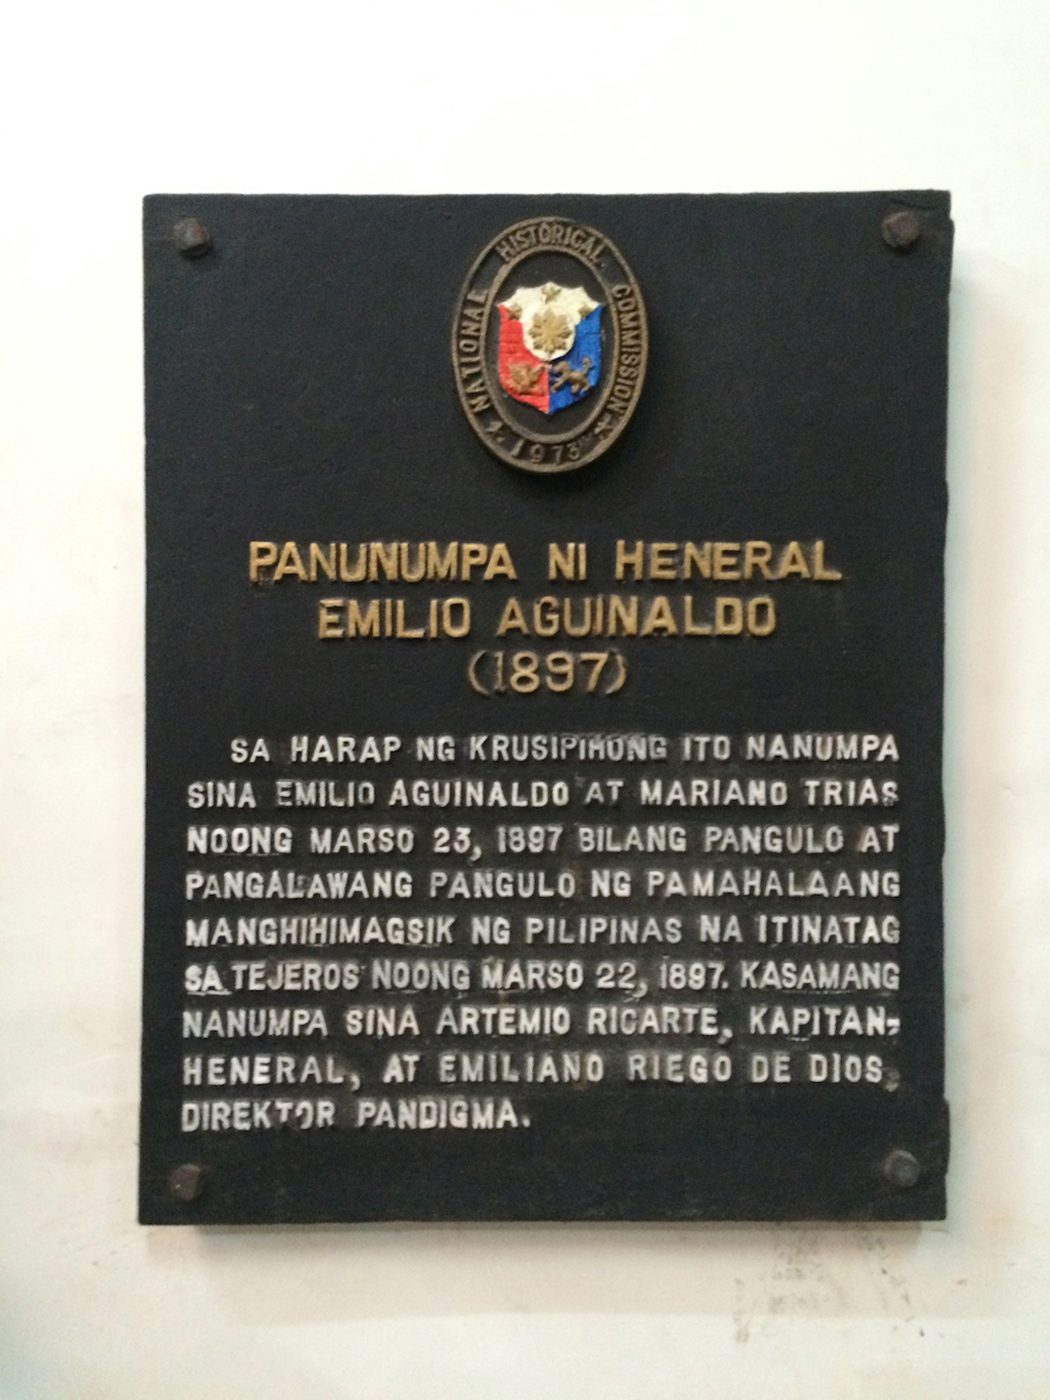 A BIT OF HISTORY. The National Historical Commission has placed this marker in the oath taking room at the Panumpaang Bayan, formerly a convent beside the Holy Cross Parish Church in Tanza, Cavite. 